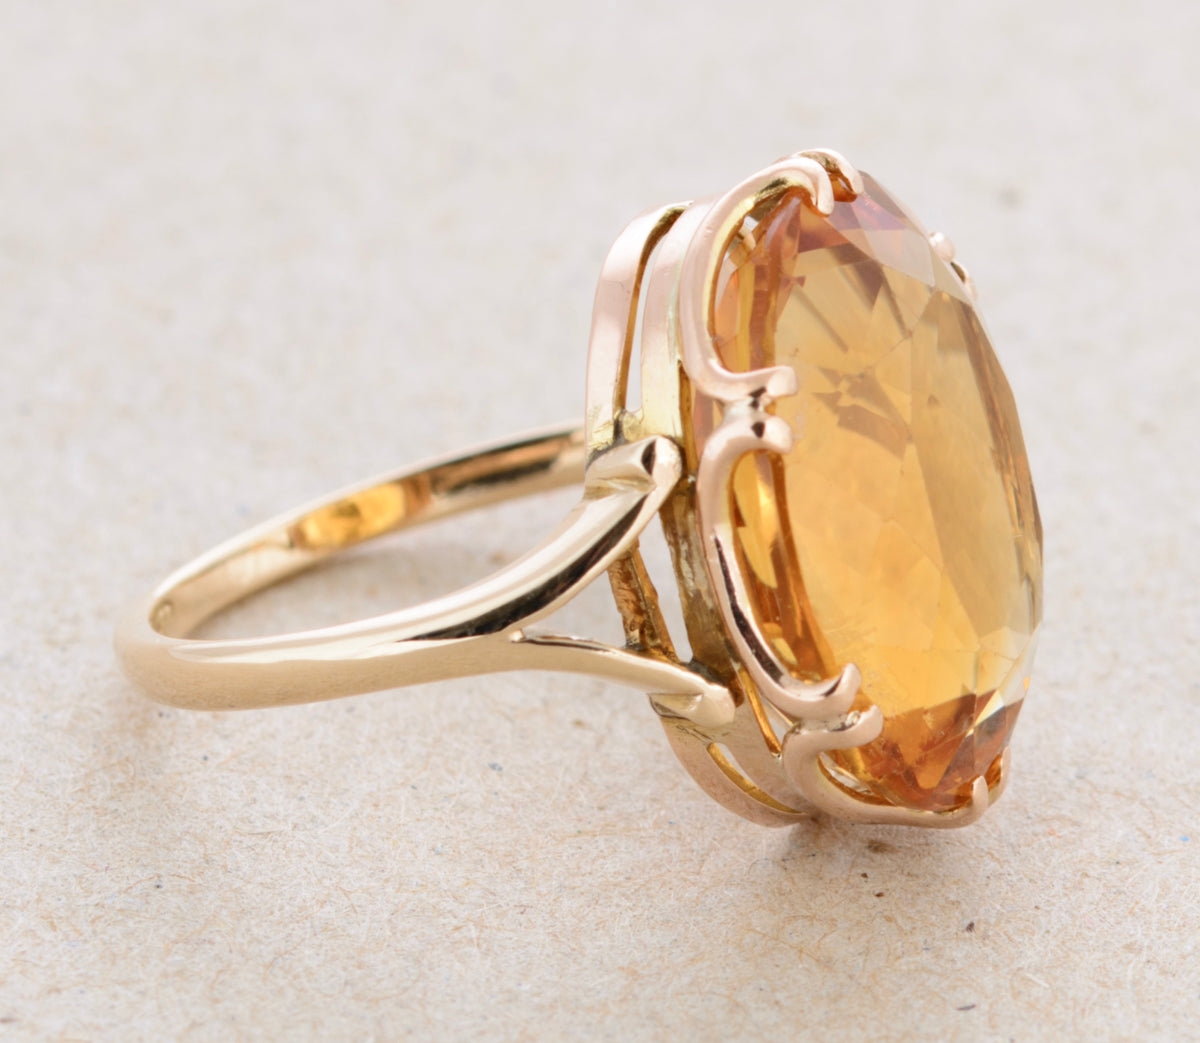 Vintage Ring In 9ct Gold With Large Natural 12.25ct Citrine Gemstone 1960's (A1763)